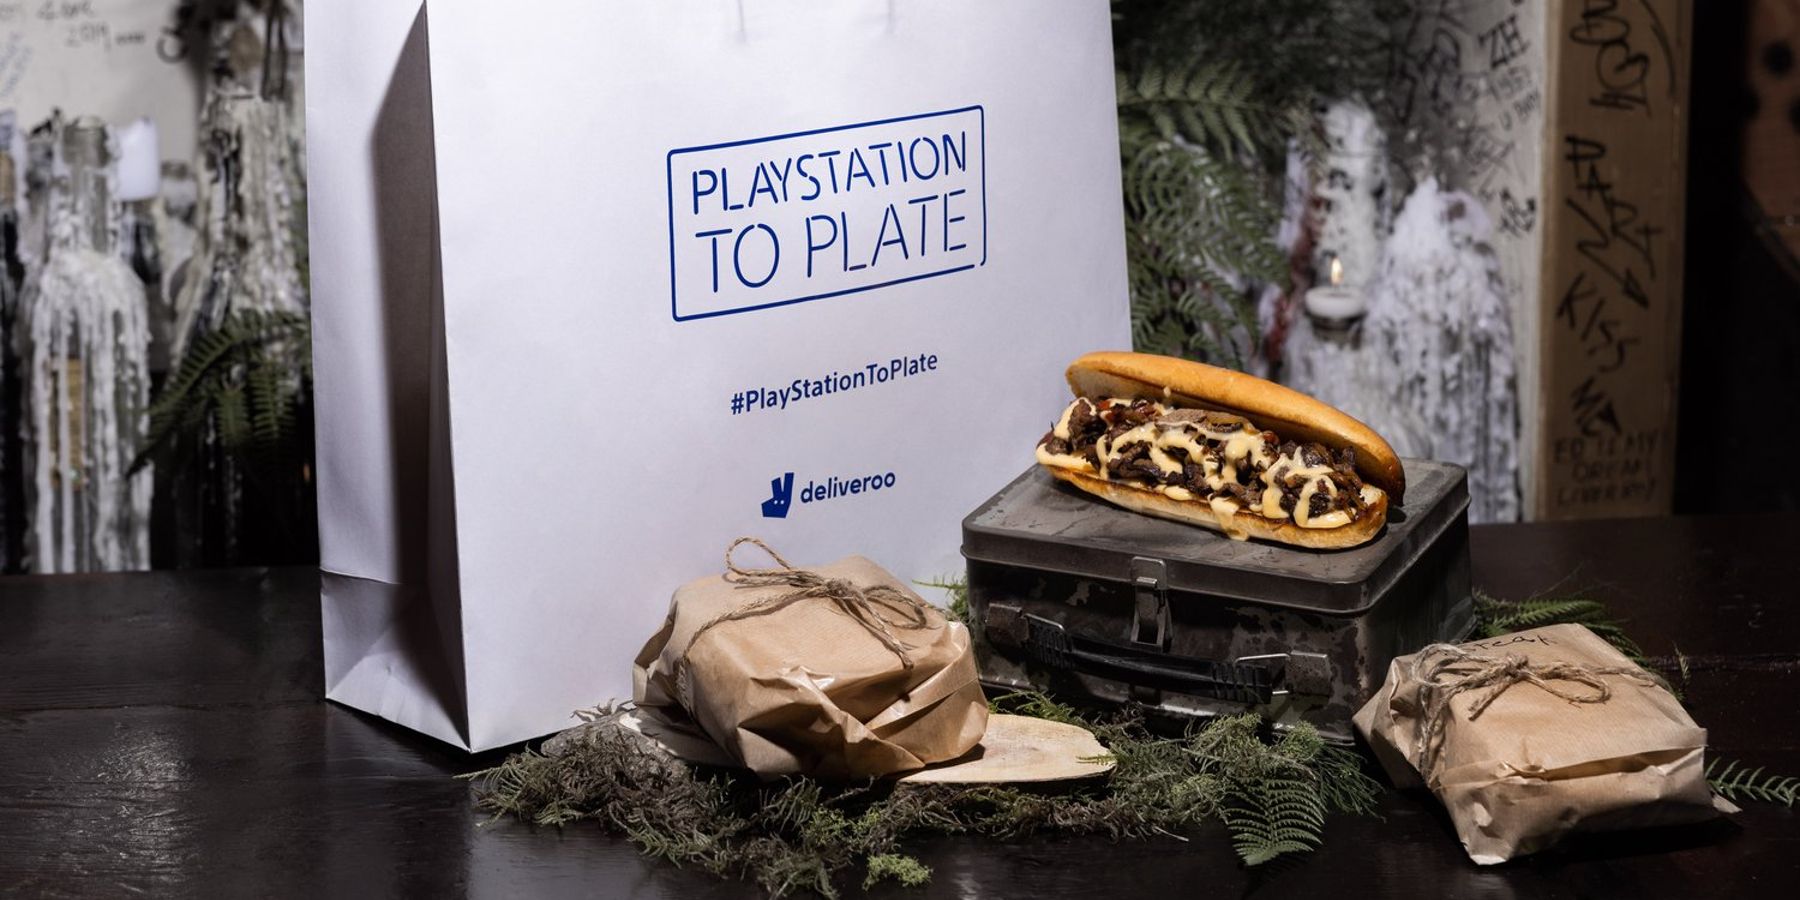 playstation to plate sony australia meals food deliveroo the last of us 2 uncharted 4 ratchet and clank